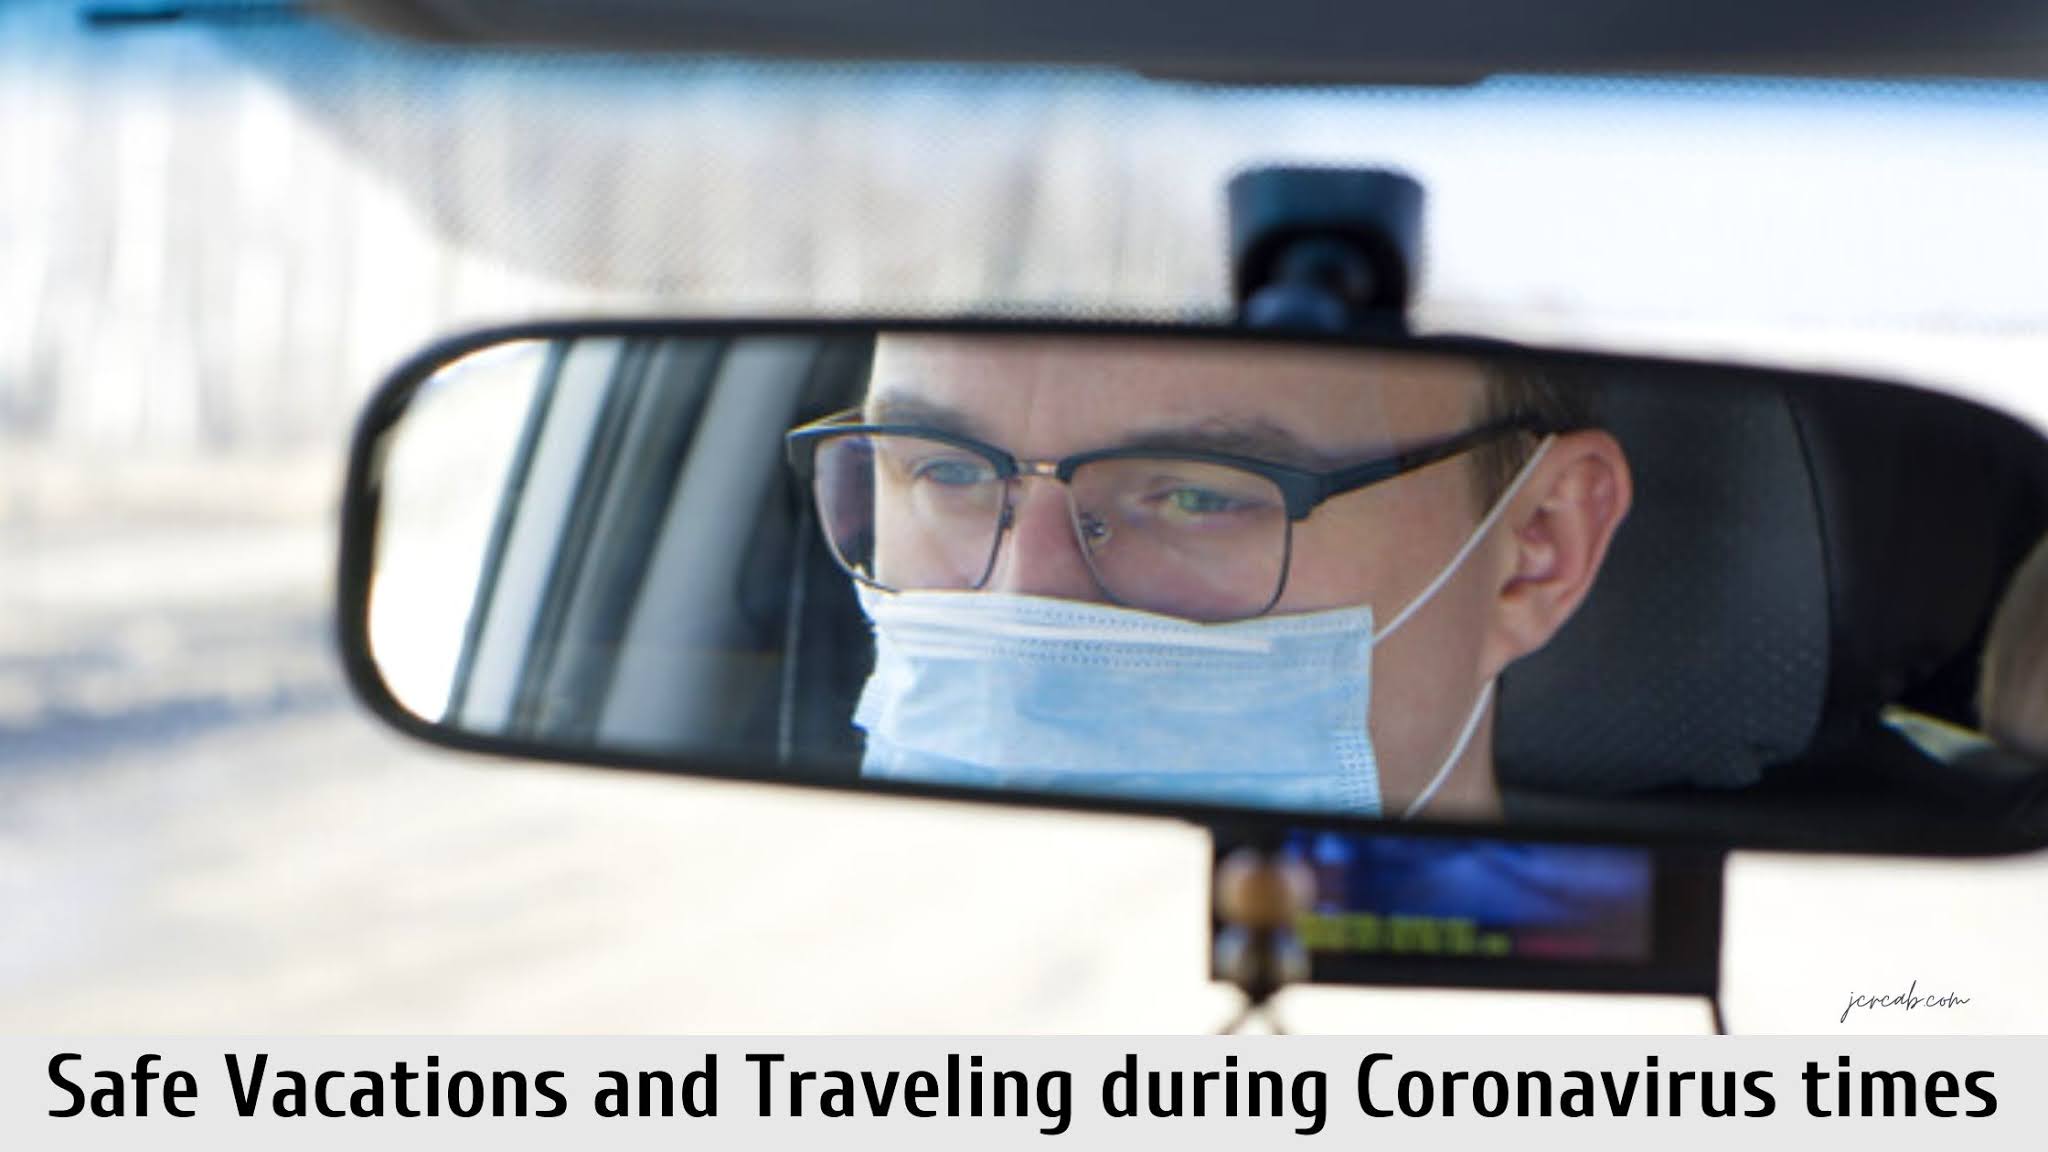 Safe Vacations and Traveling during Coronavirus times